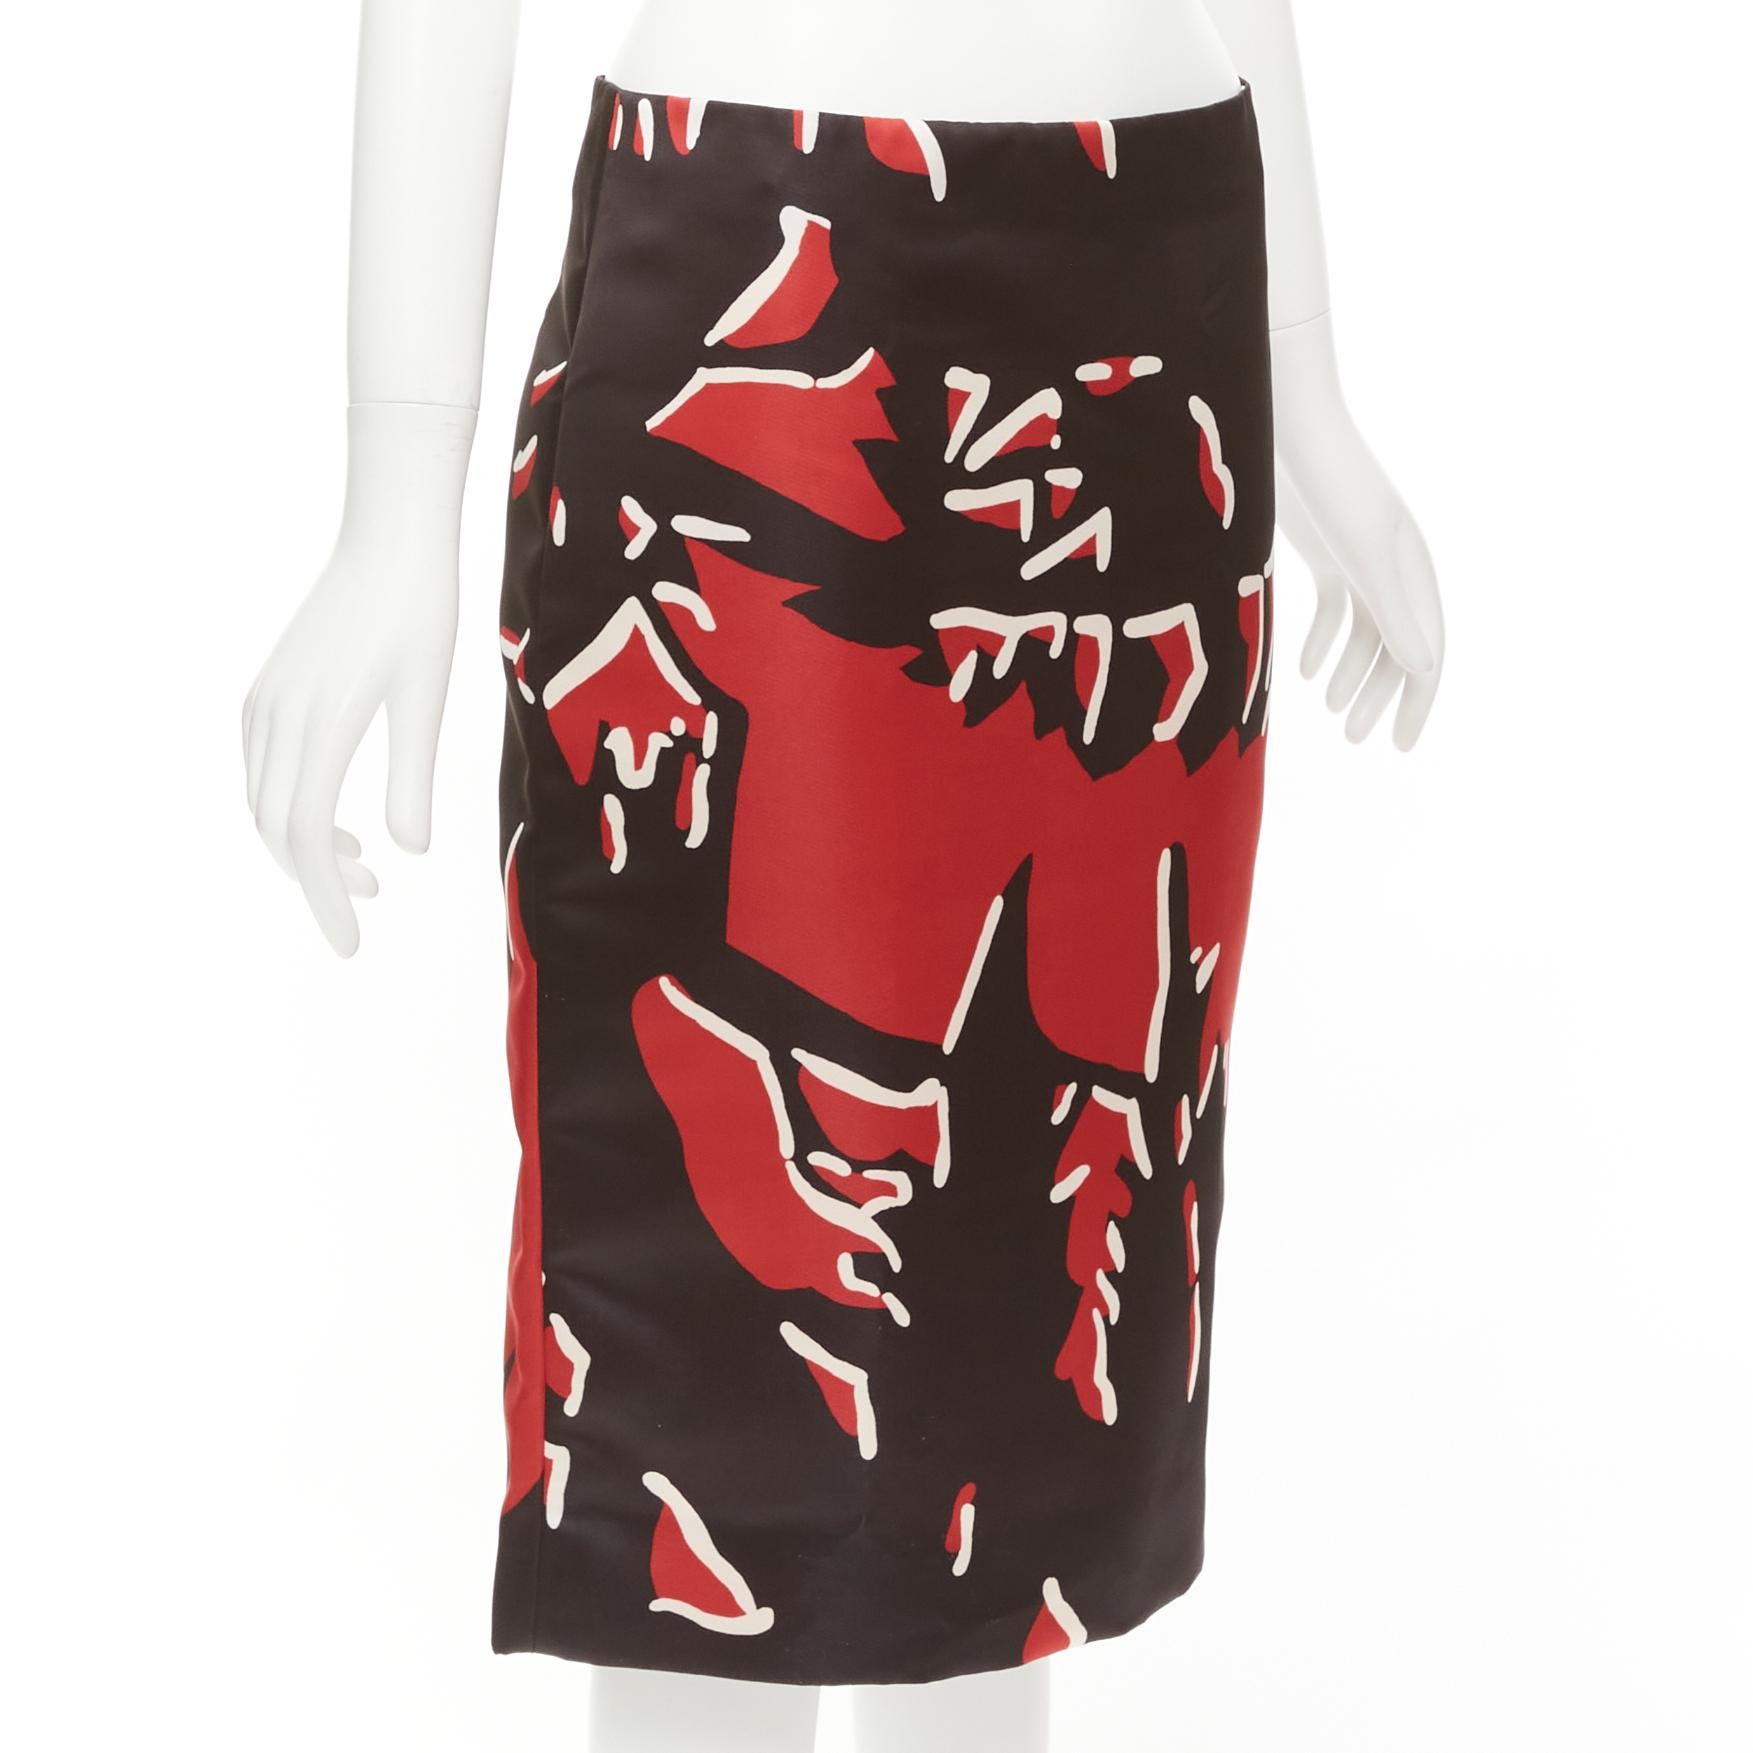 MARNI black red abstract print mid waist knee length skirt IT40 S
Reference: CELG/A00428
Brand: Marni
Material: Polyester
Color: Black, Red
Pattern: Abstract
Closure: Zip
Lining: White Fabric
Extra Details: Back zip.
Made in: